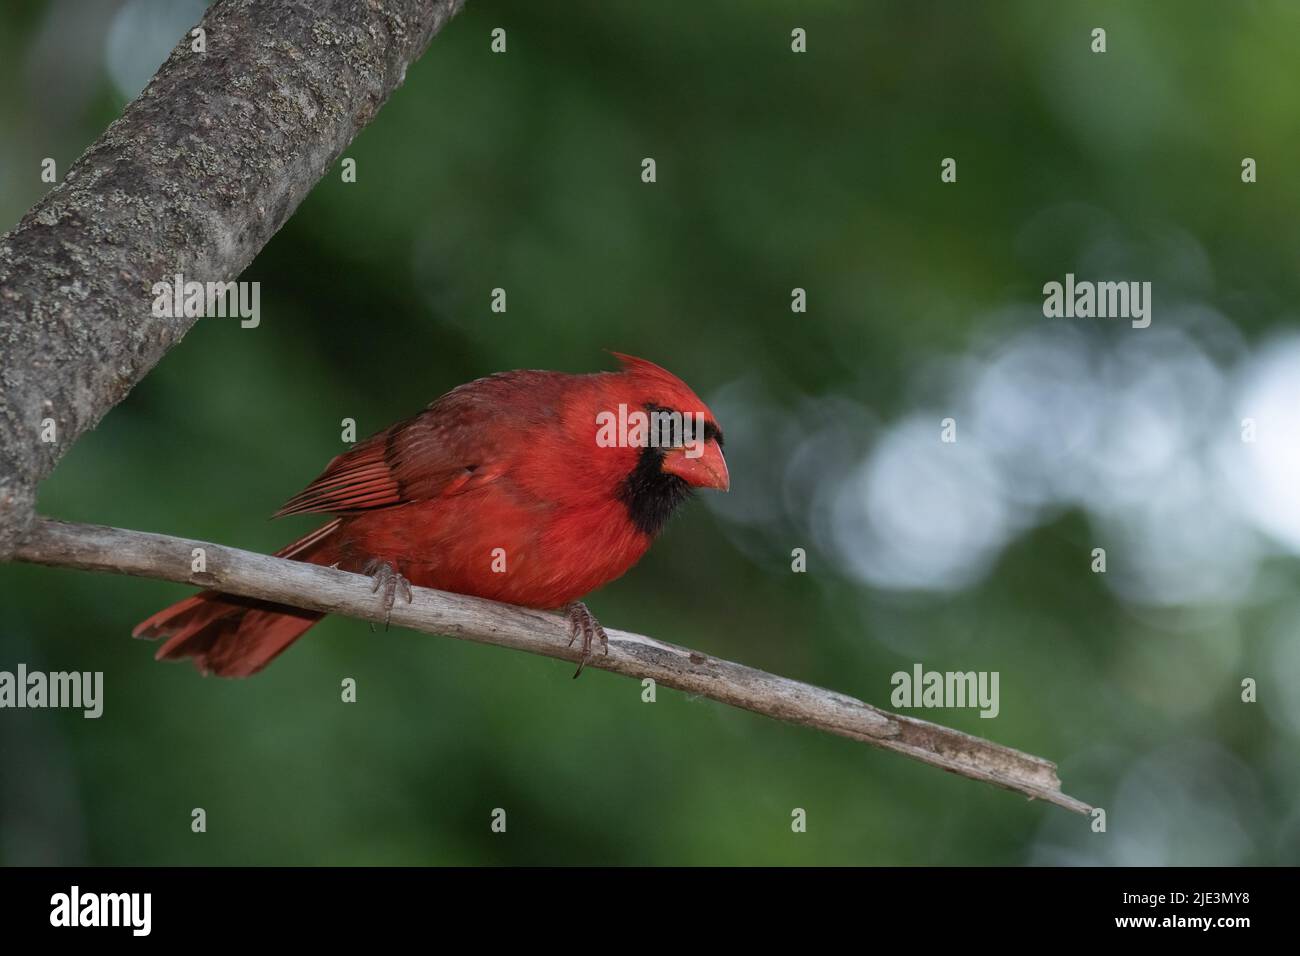 An adult male Northern Cardinal closeup perched on a branch Stock Photo